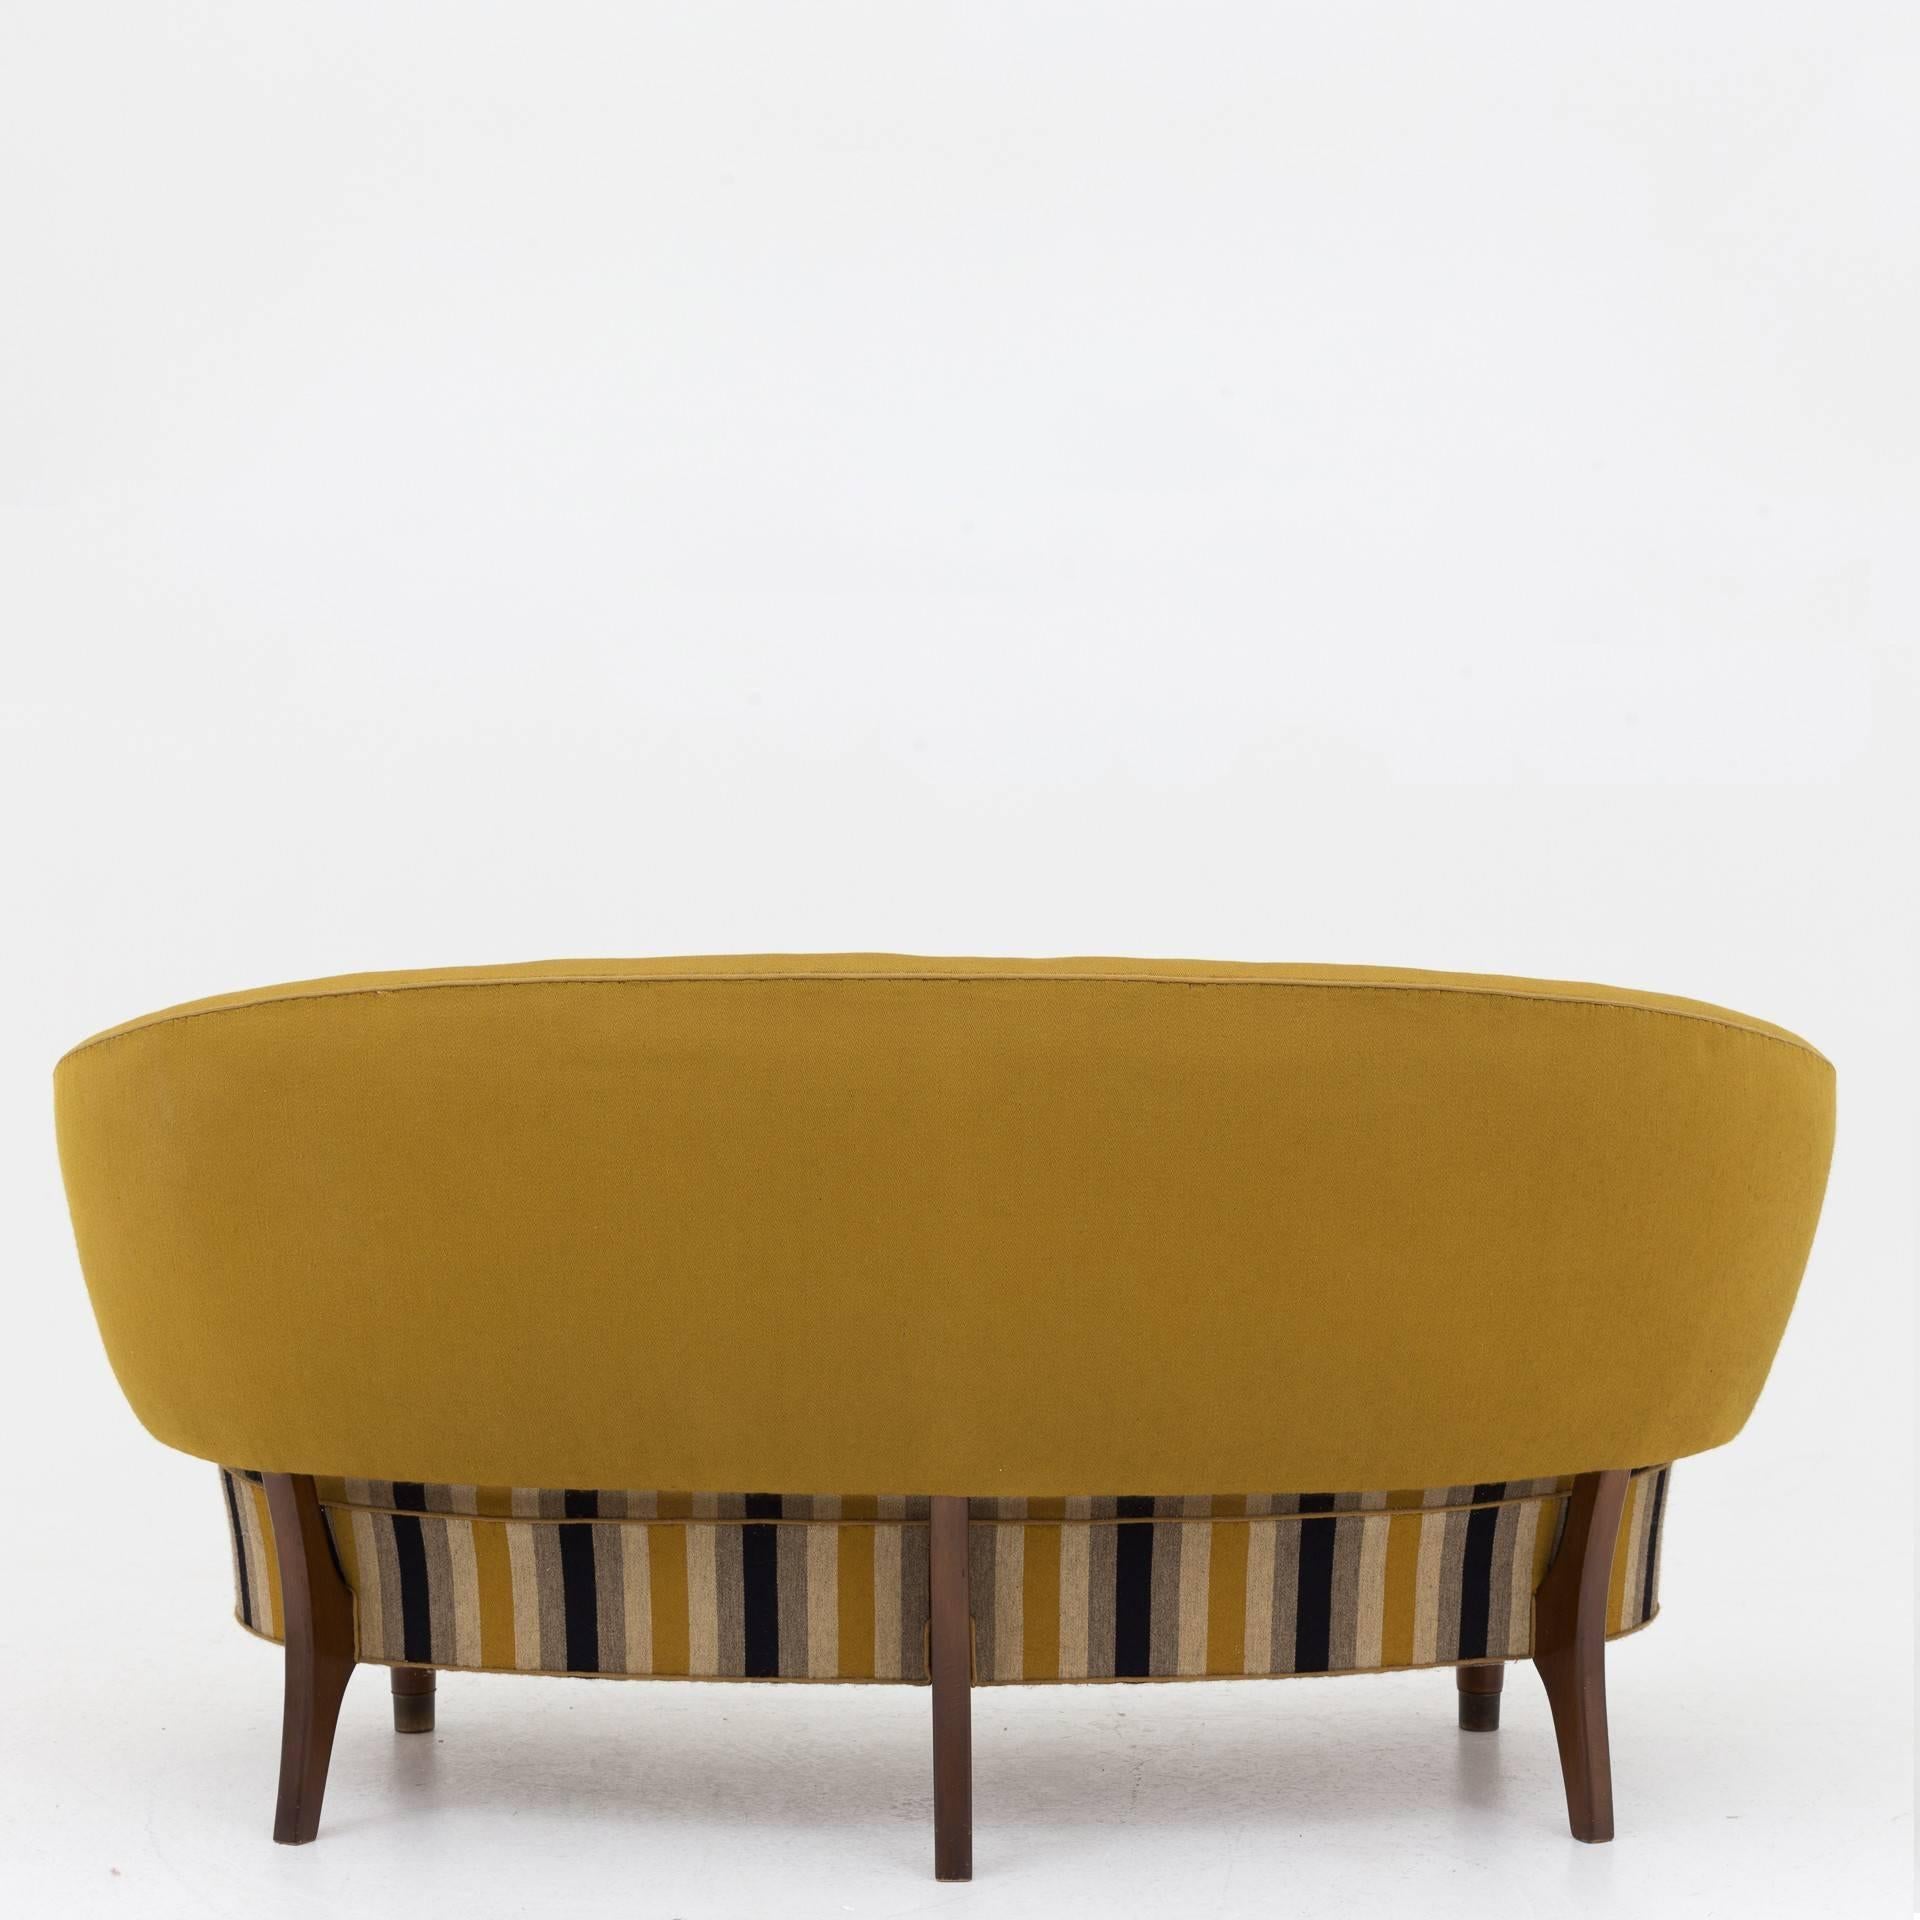 Sofa with floating back in yellow and brown fabric. Leg in stained beech and brass feet. Designed in 1953. Maker Sattrups Polstermøbelfabrik.